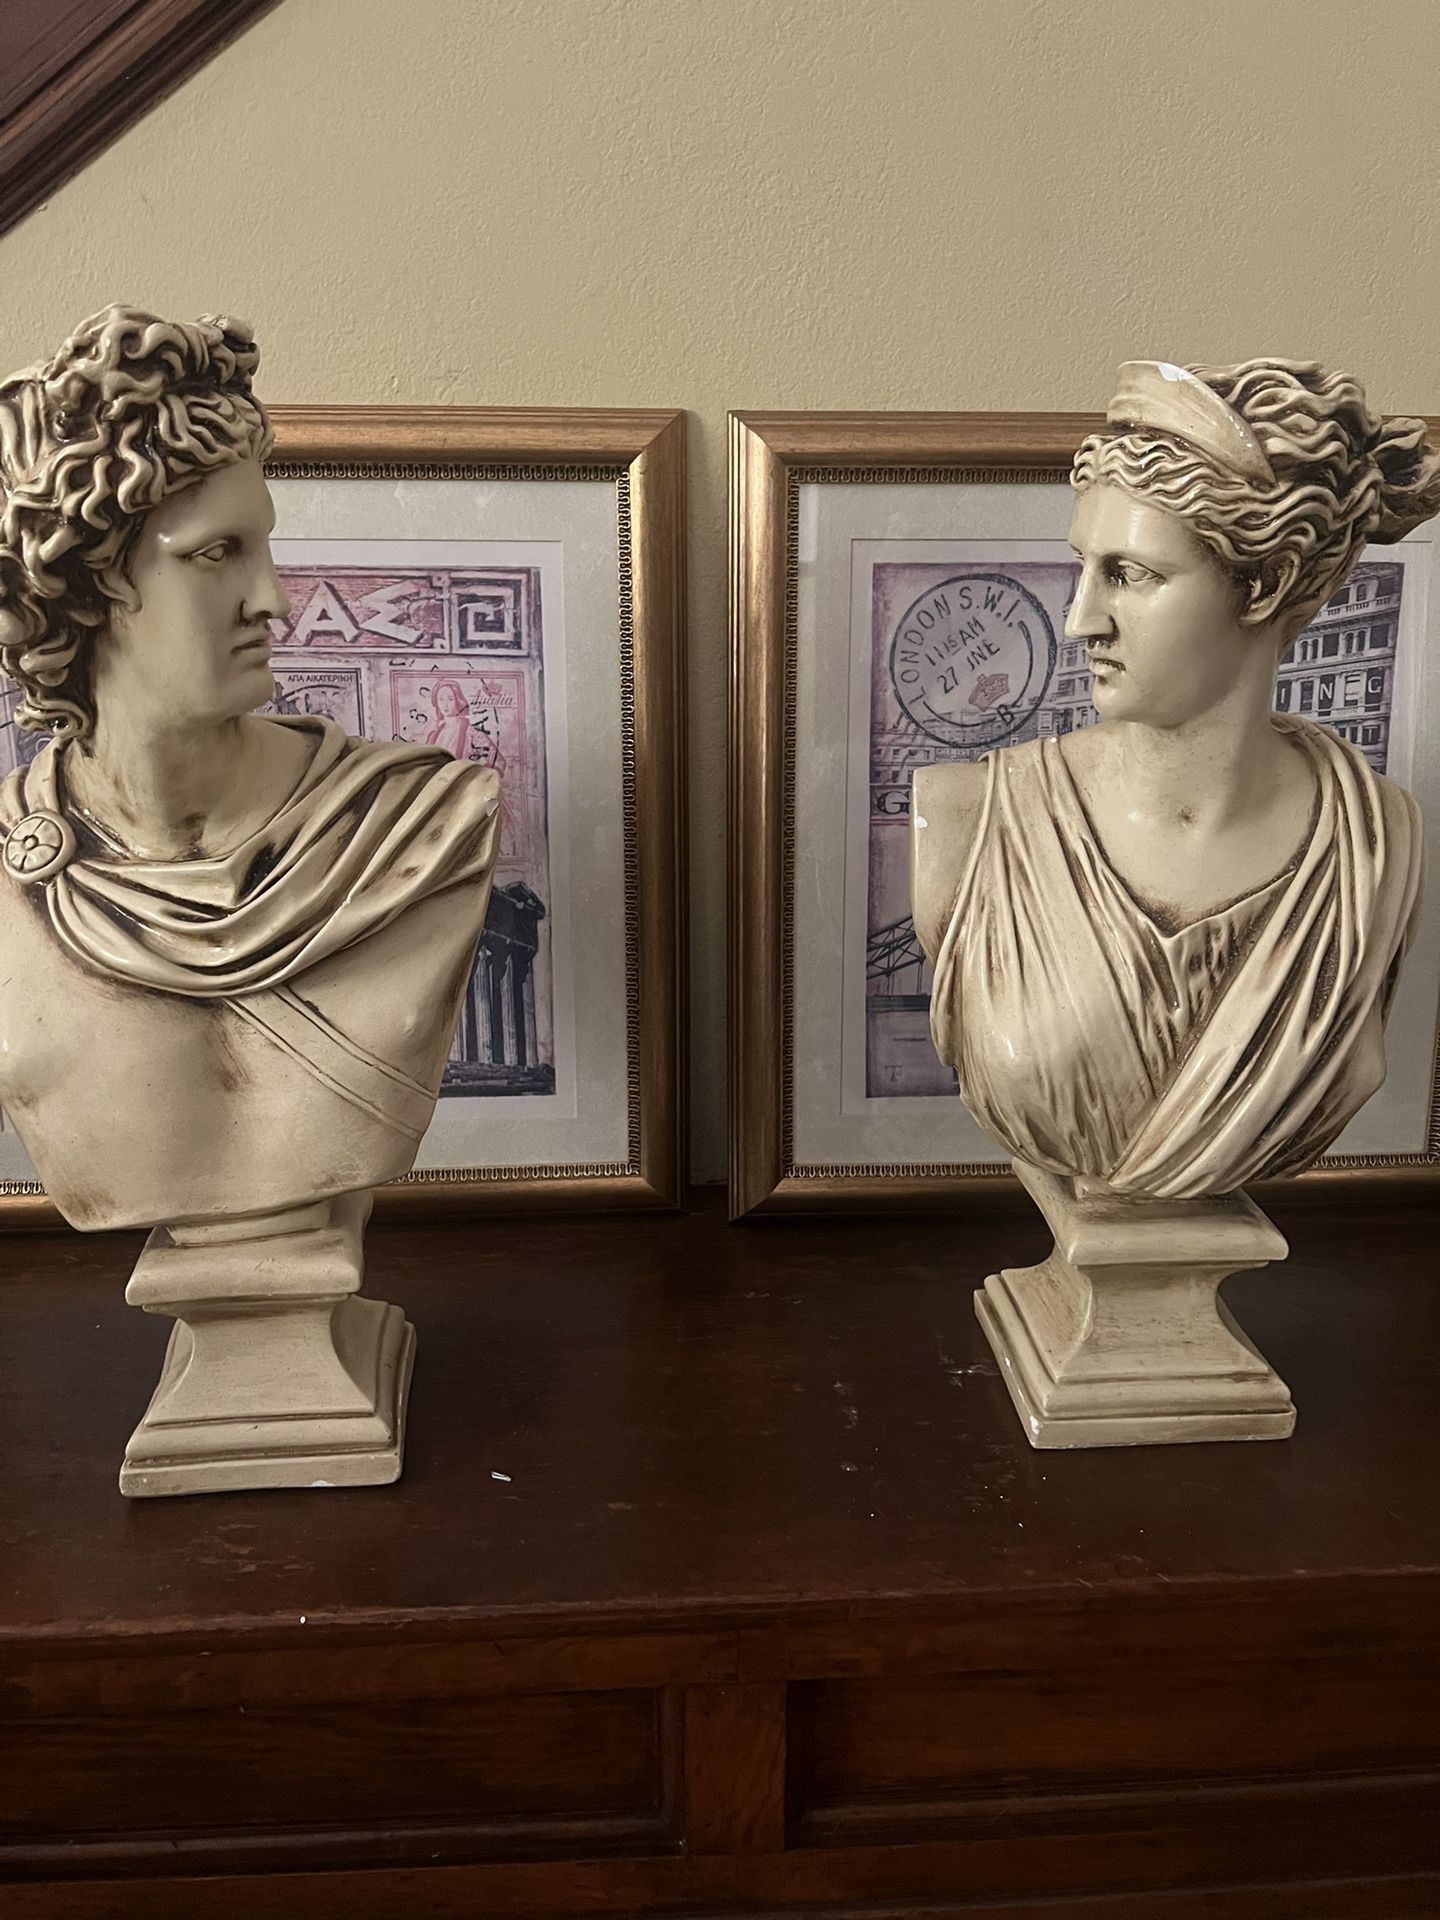 Bust Statues 